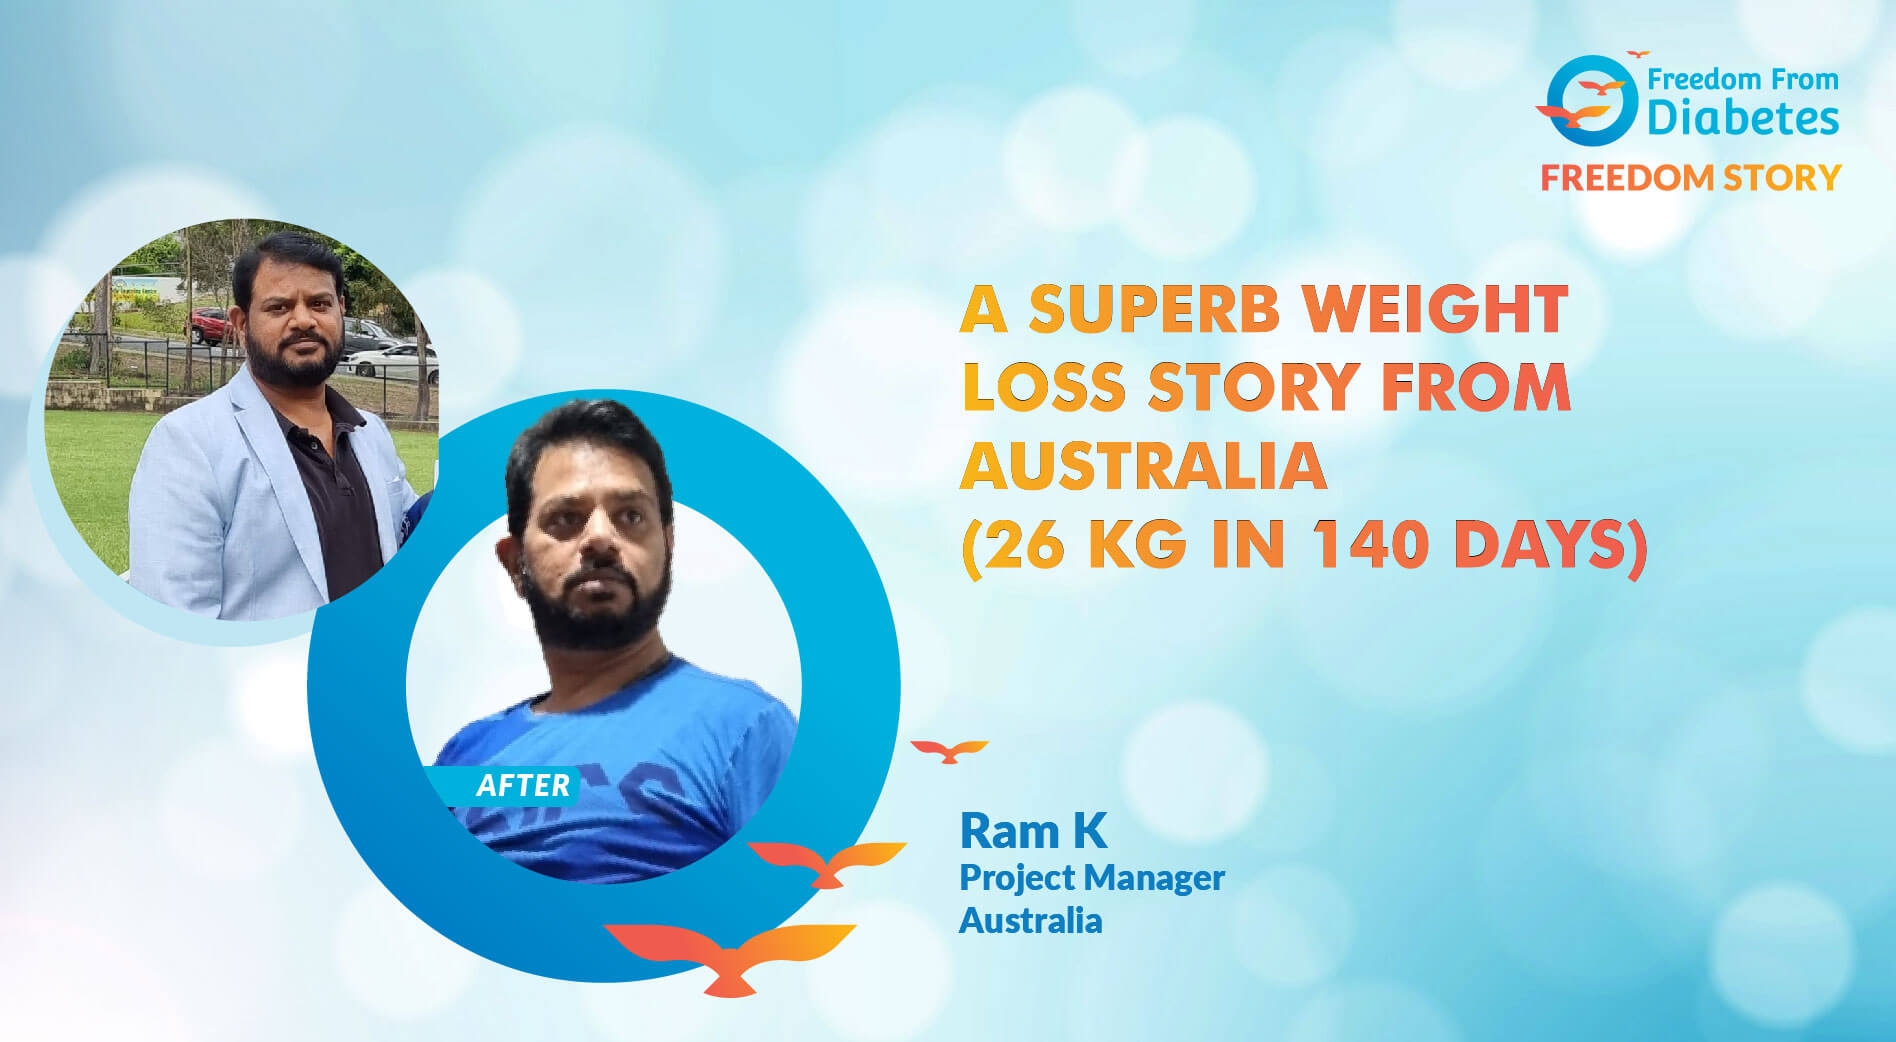 A superb weight loss story from Australia